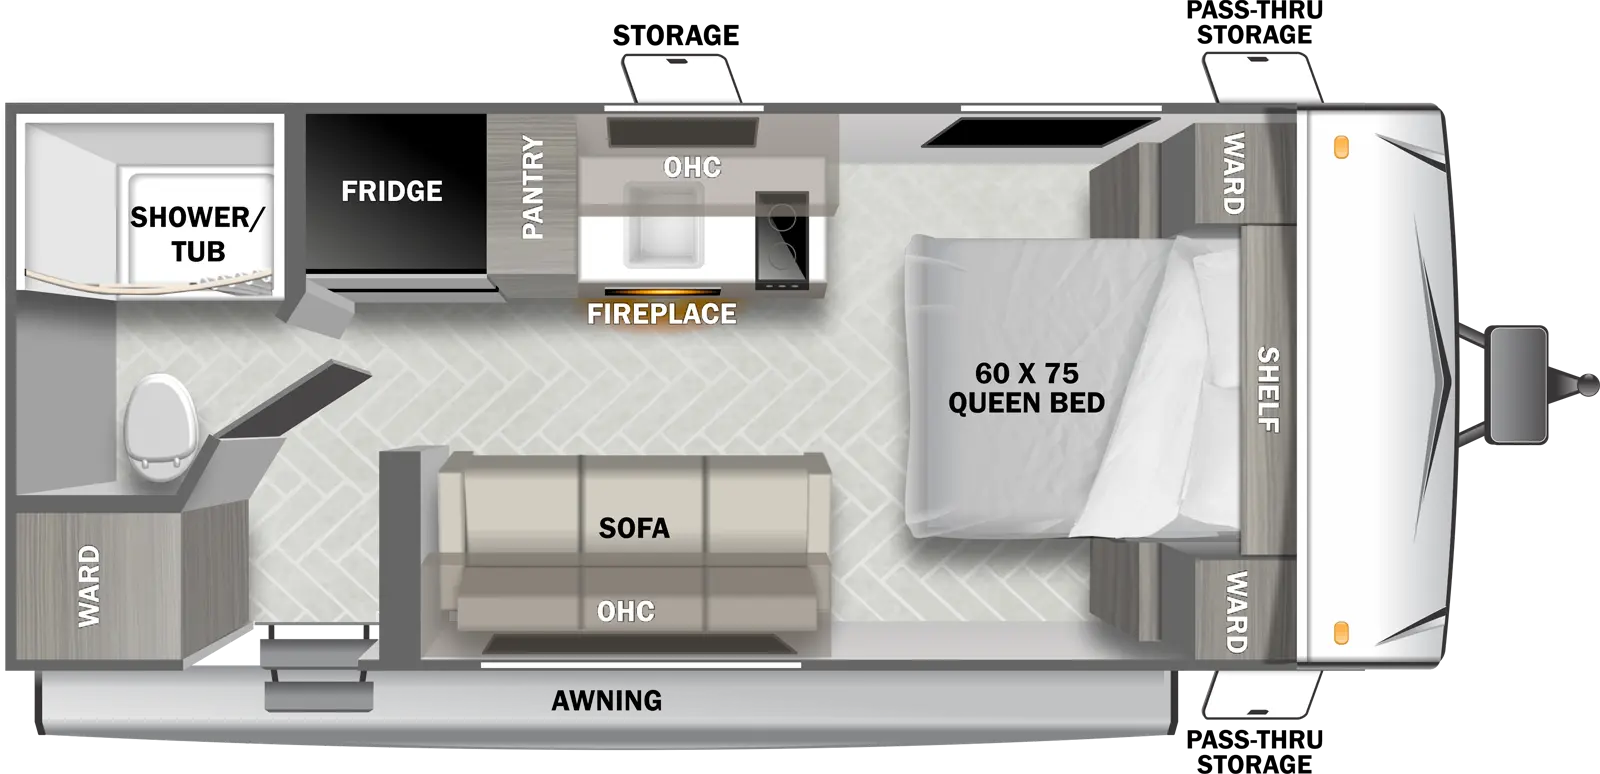 The T176BQCE has zero slideouts and one entry. Exterior features an awning, and pass-through storage. Interior layout front to back: foot-facing queen bed with shelf, and wardrobes on each side; door side sofa, overhead cabinet, and entry door; off-door side kitchen counter with cooktop, sink, fireplace, overhead cabinet, pantry, and refrigerator; rear wardrobe, and bathroom with toilet and shower/tub only.